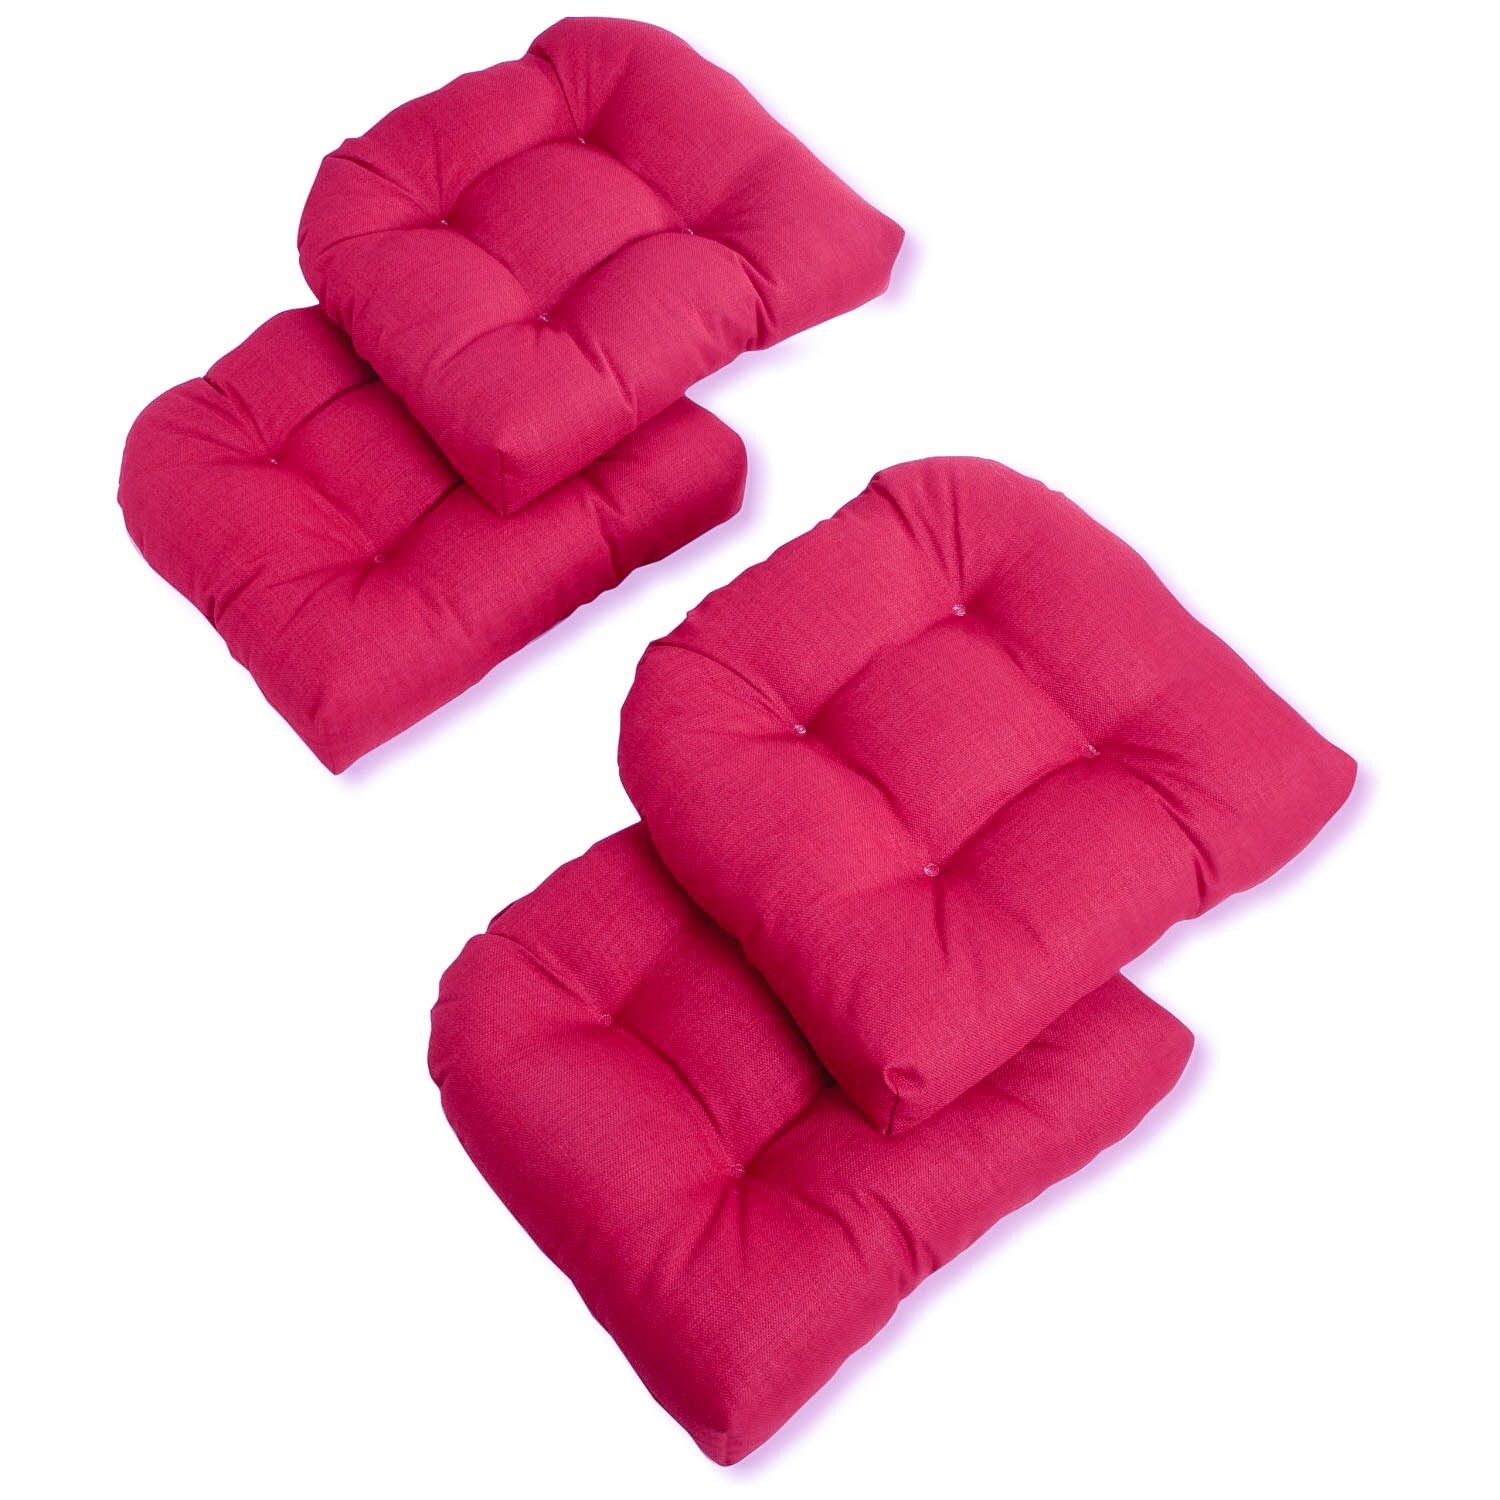 https://ak1.ostkcdn.com/images/products/is/images/direct/2fae5964b1b8f3835d0b1cf95a4639aa41172761/Blazing-Needles-19-inch-Indoor-Outdoor-Chair-Cushion-%28Set-of-4%29.jpg